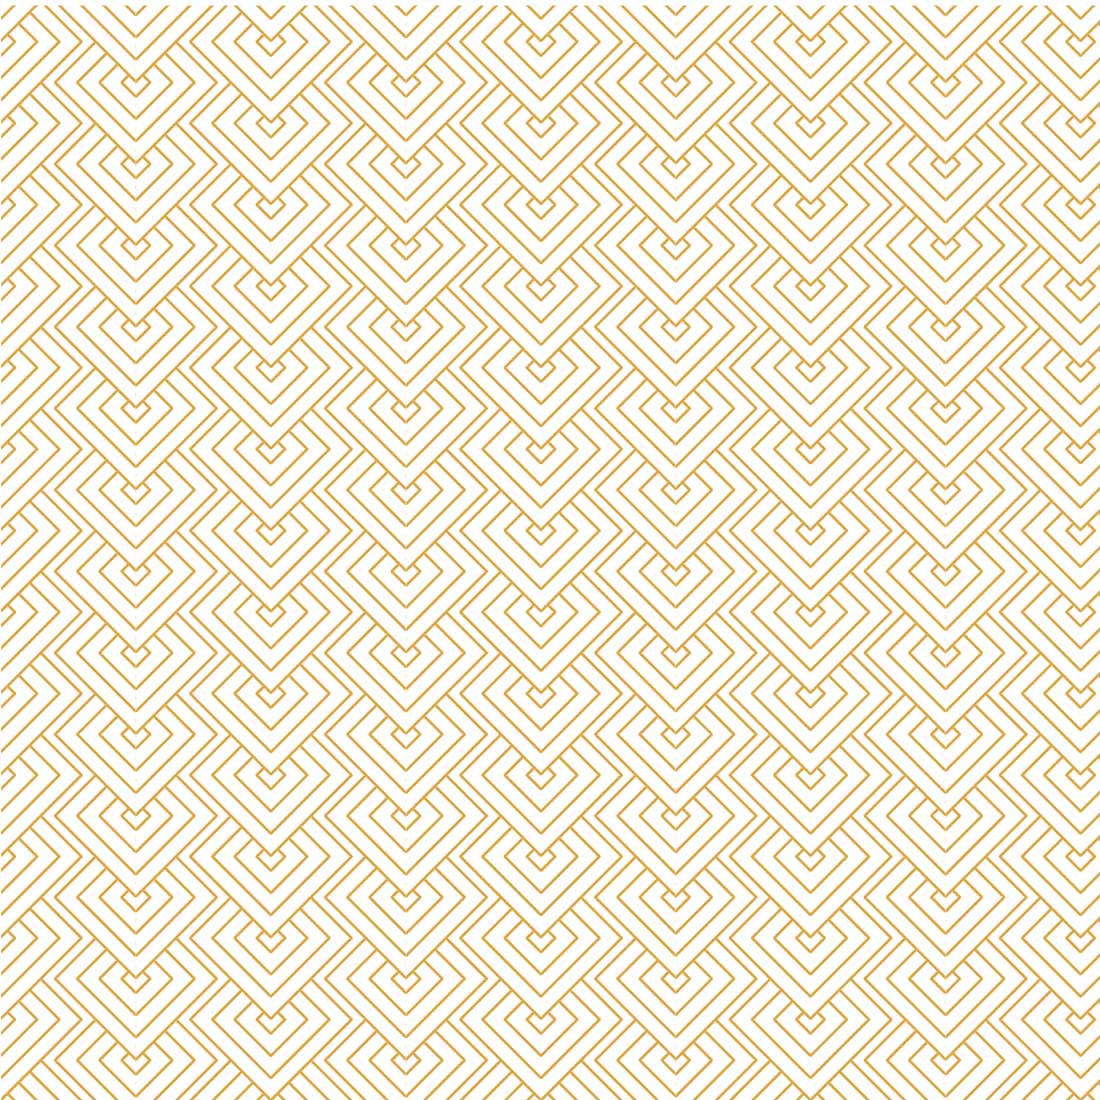 White and yellow pattern with a white background.